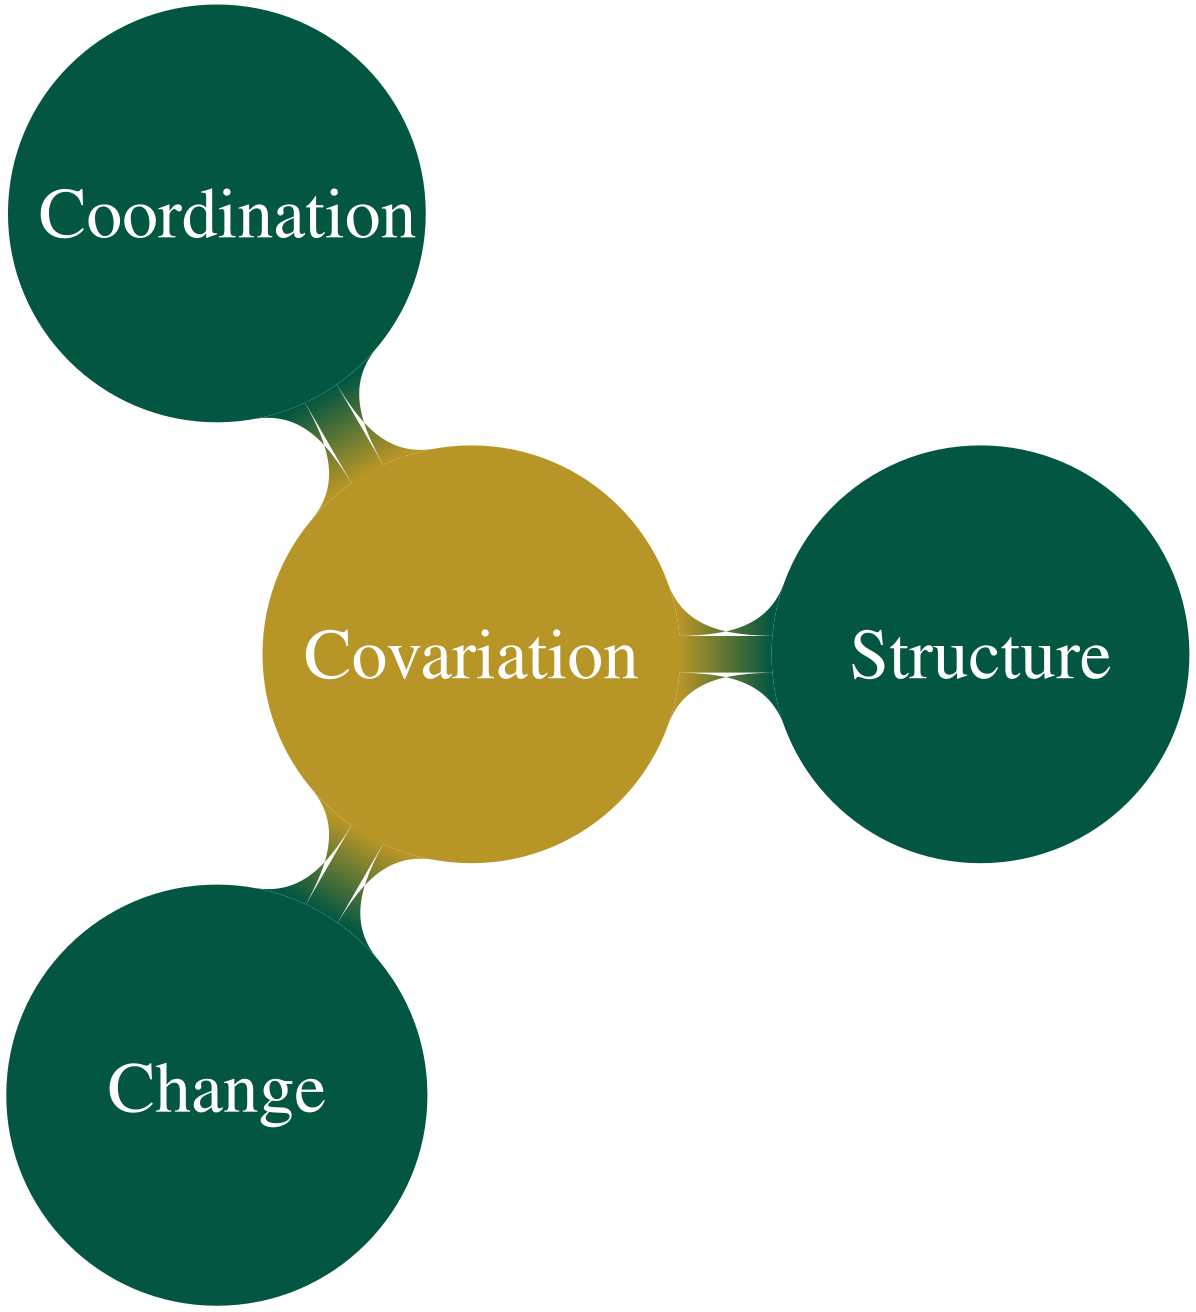 Instantiations of the Trinity of Covariation